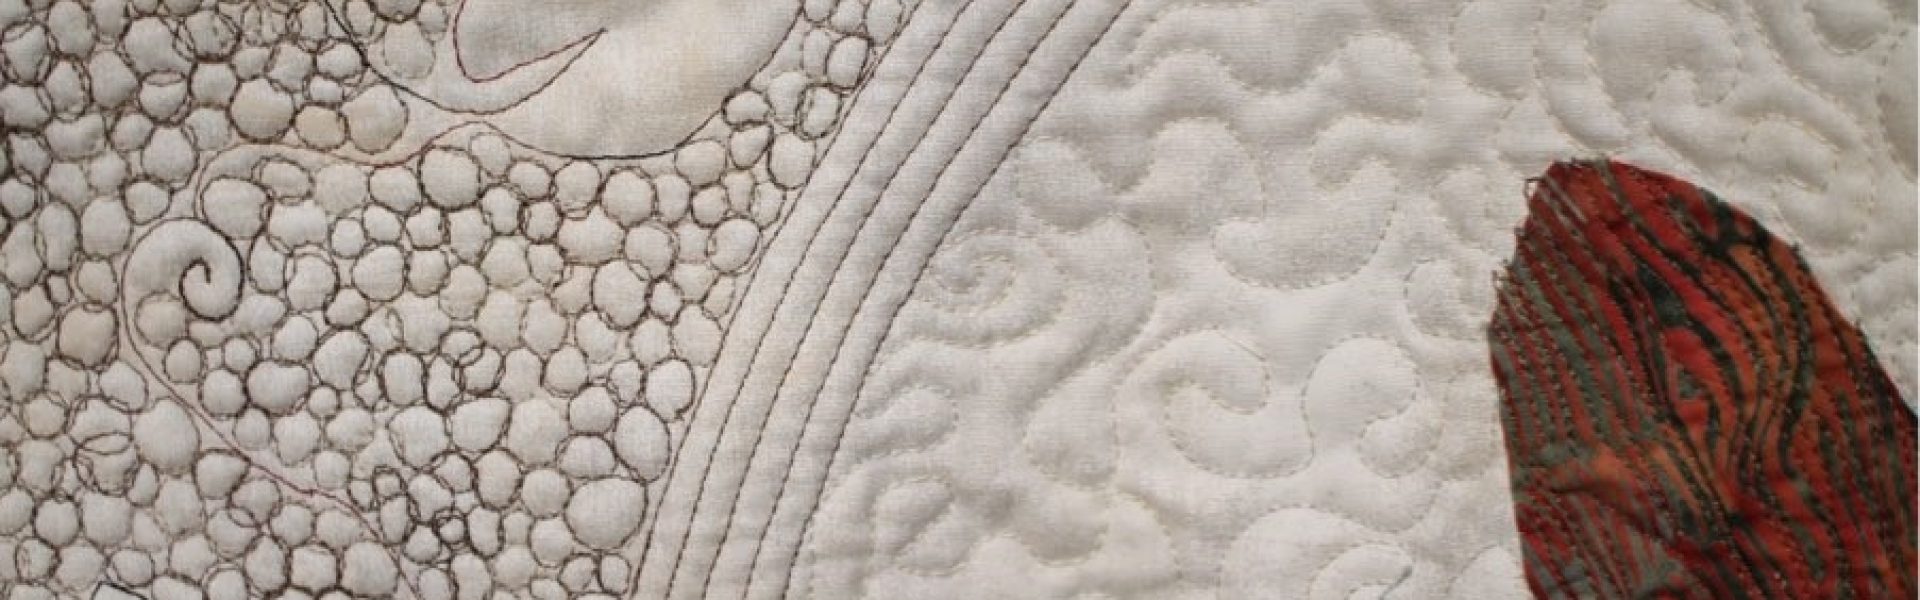 Machine Embroidery detail